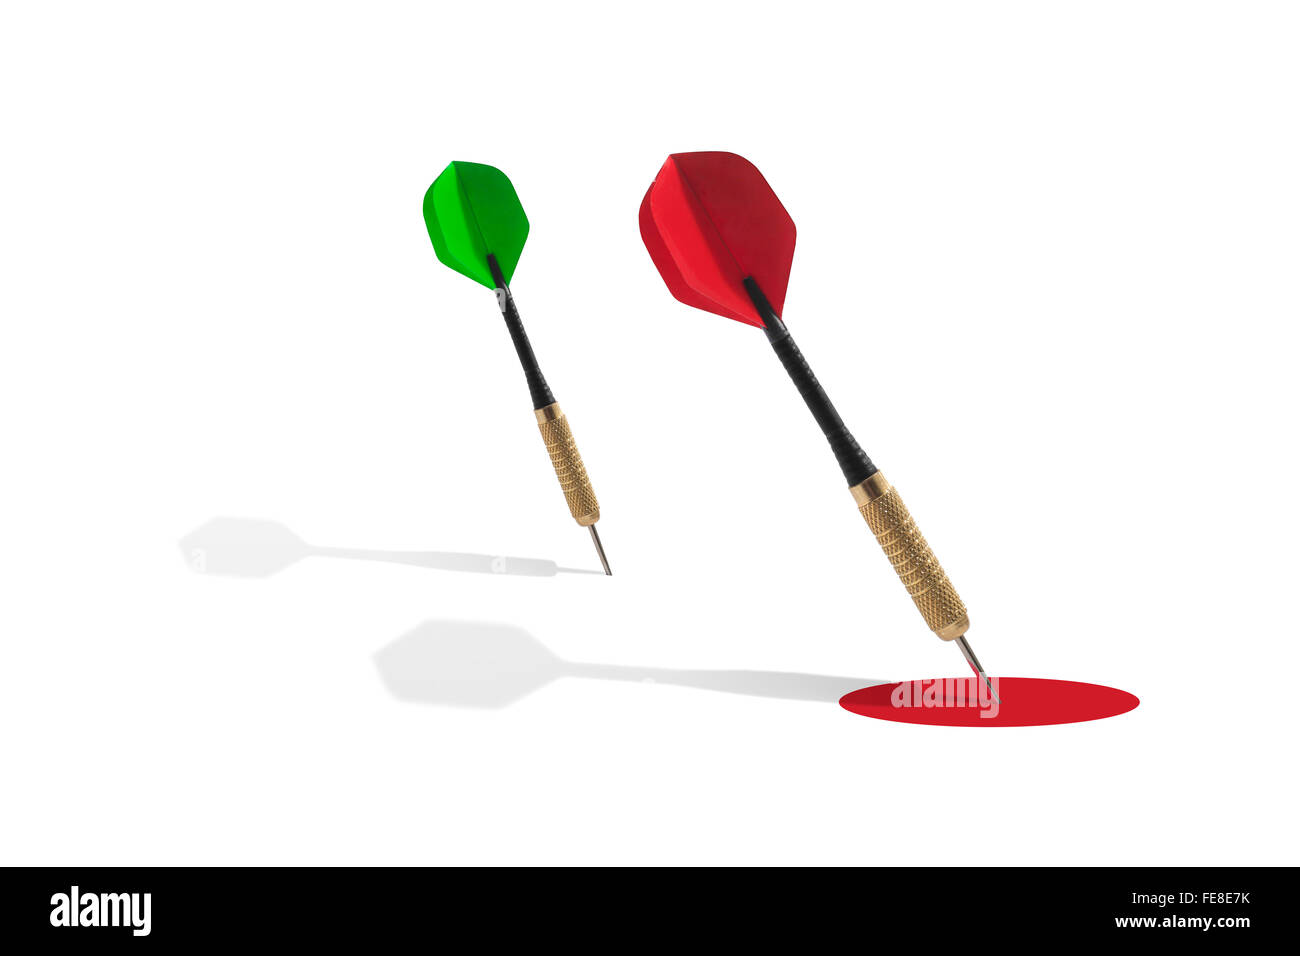 Two Darts and a Red Target on a White Background Stock Photo